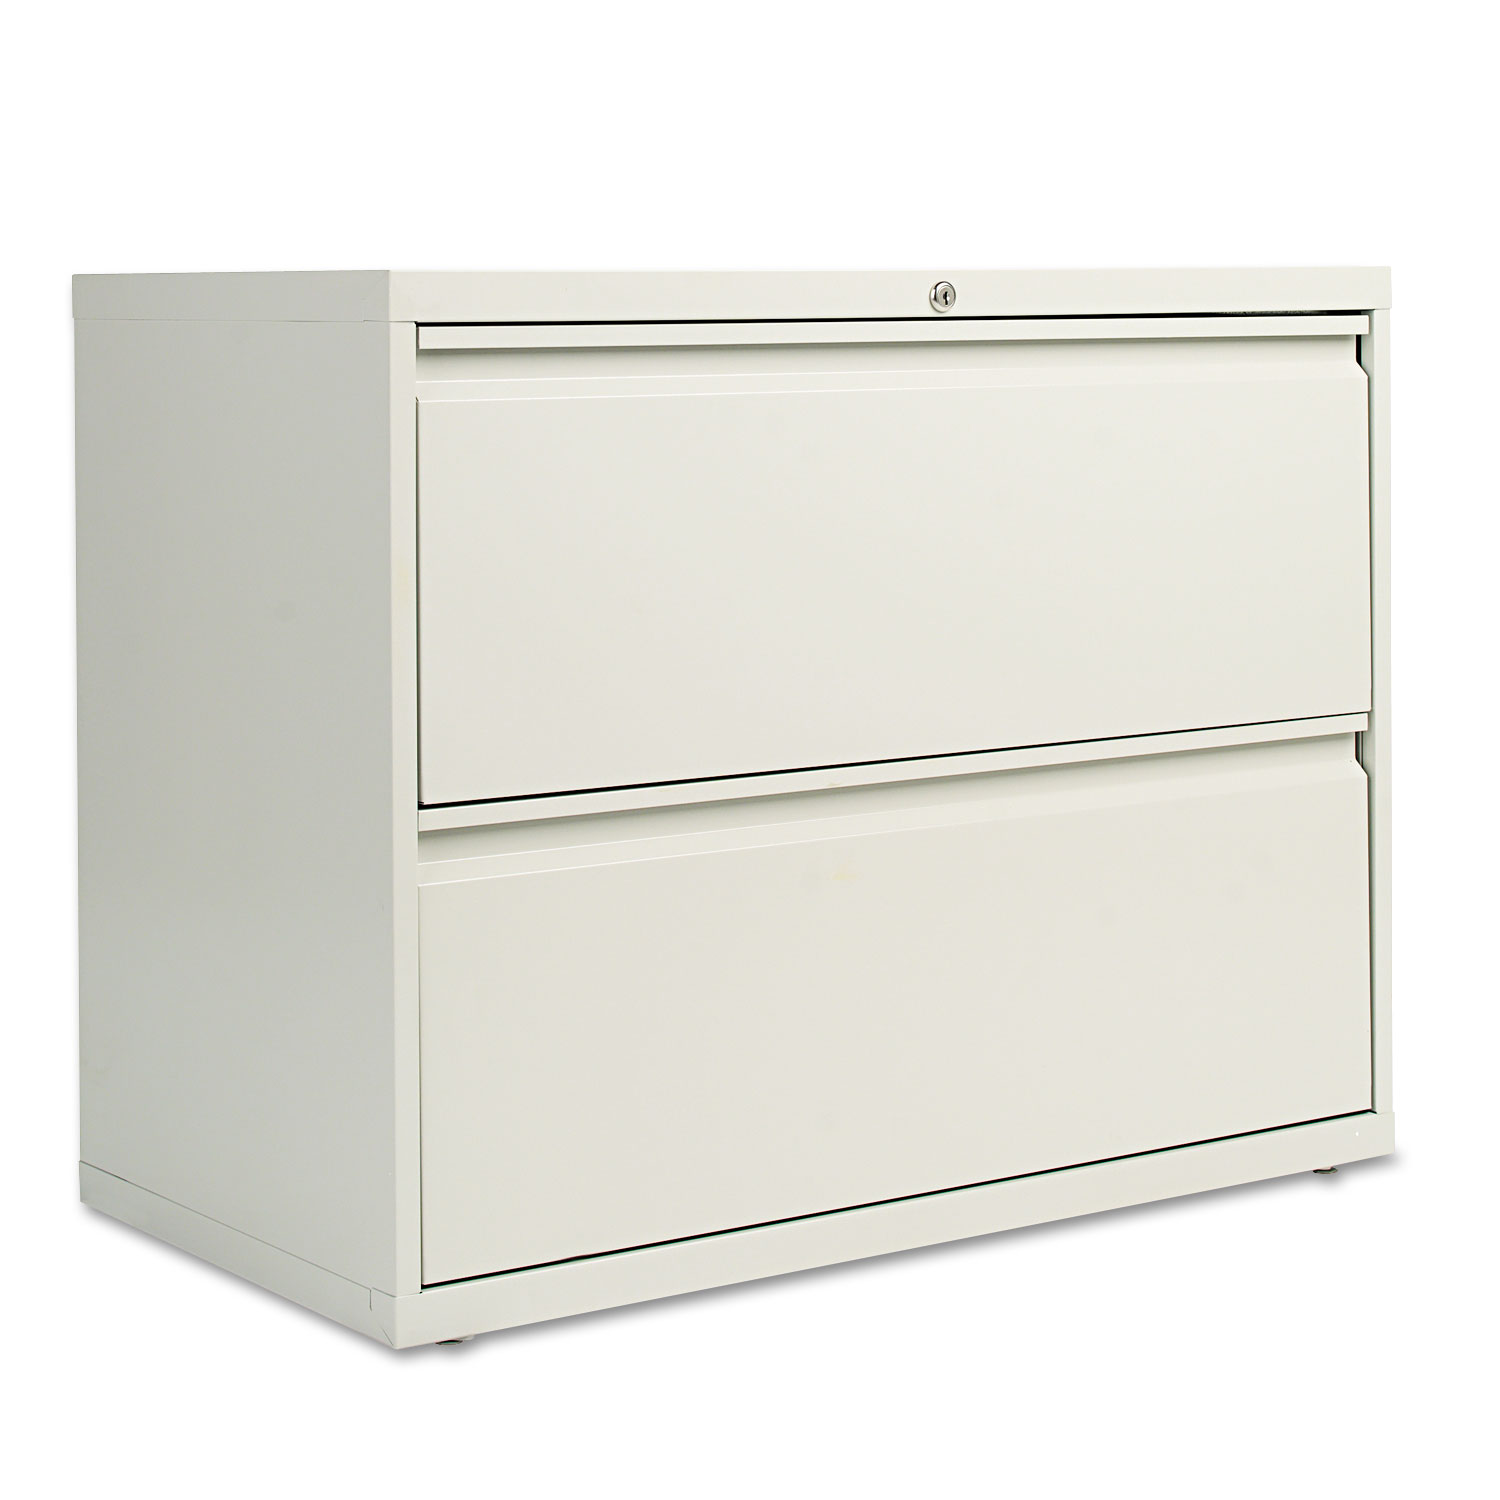  Alera ALELF3629LG Two-Drawer Lateral File Cabinet, 36w x 18d x 28h, Light Gray (ALELF3629LG) 